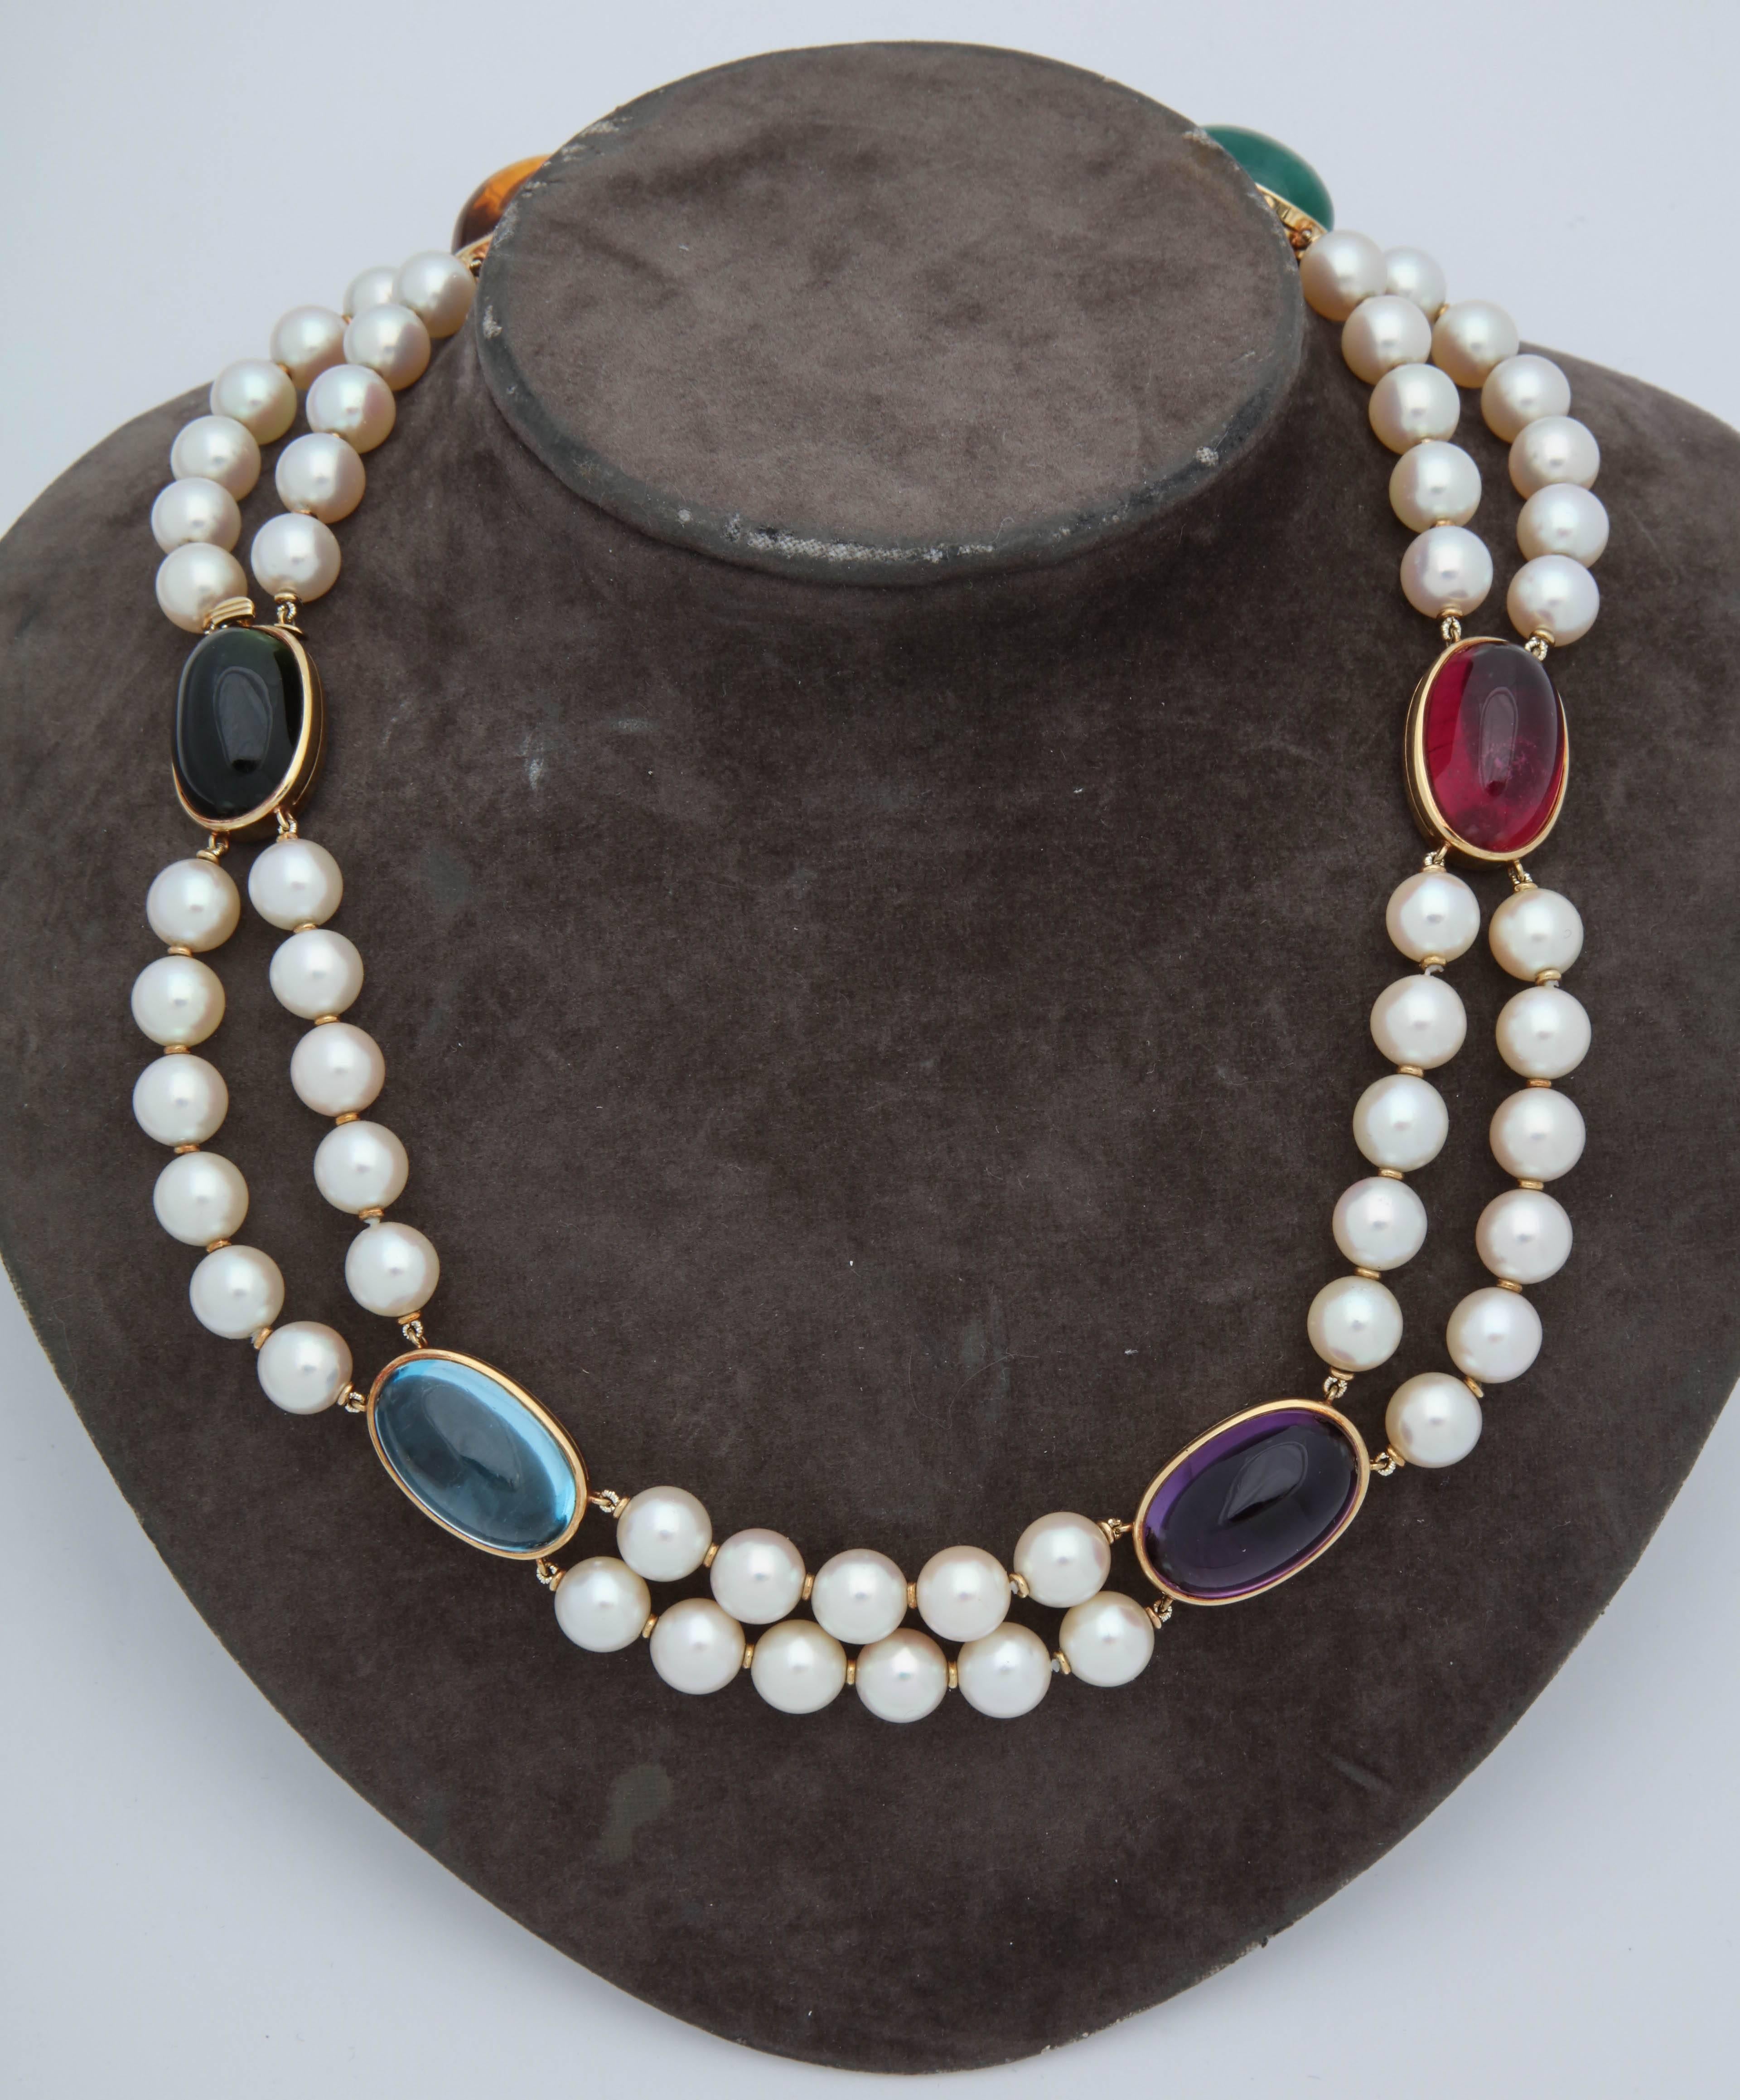 One Ladies Unusual Double Strand 9MM Pearl Choker Necklace Designed With Six Cabochon Colored Stones. One Large Emerald Cabochon,One Large Rubelite Cabochon,One Large Aquamarine Cabochon,One Large Citrine Cabochon,One Large Amethyst Cabochon, And